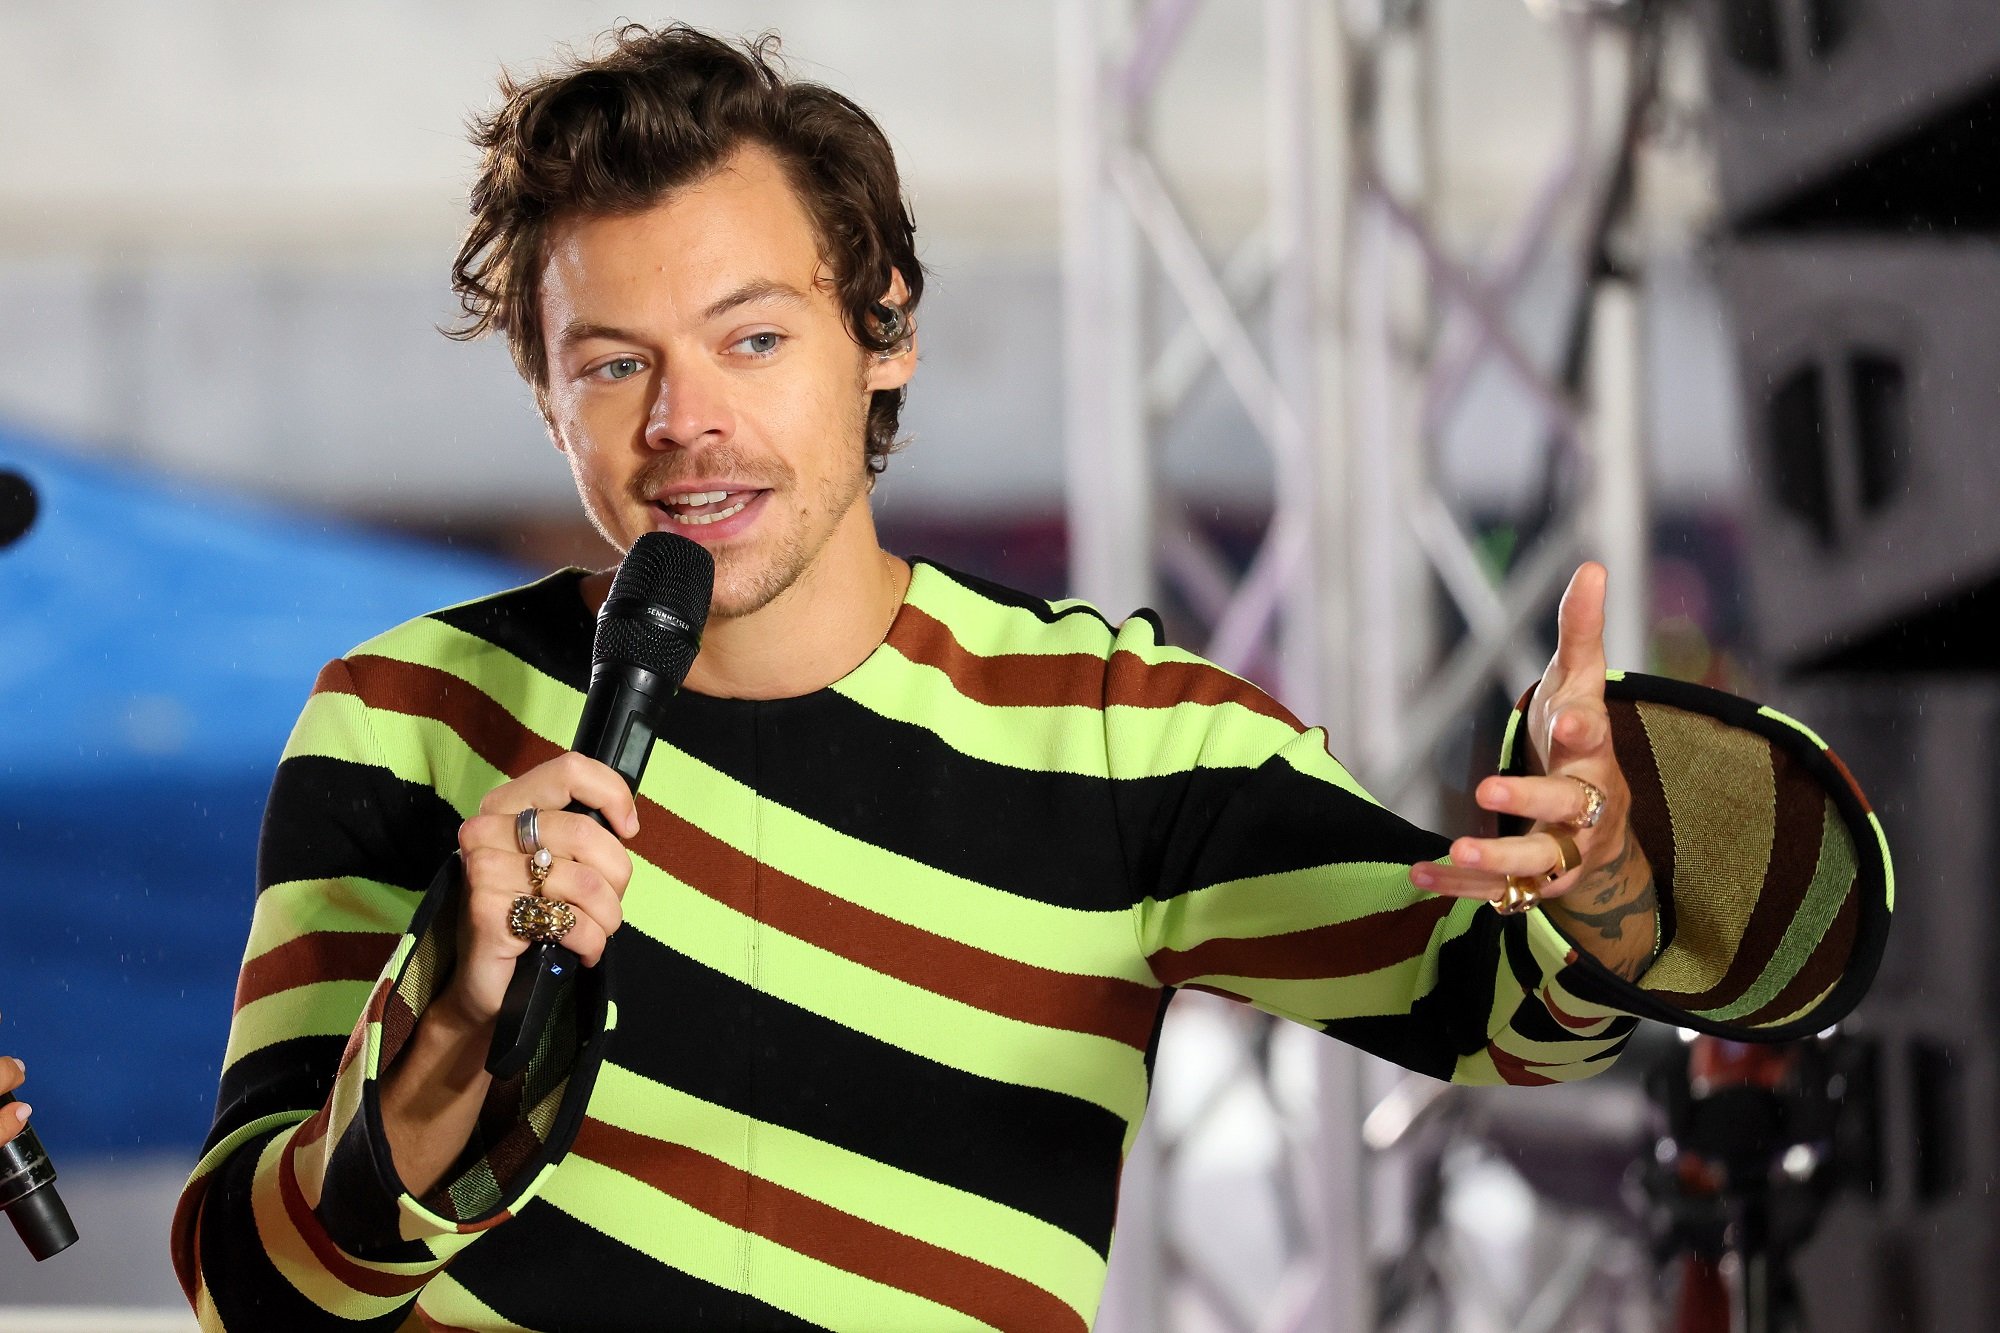 Harry Styles wearing a striped shirt onstage at NBC's 'Today'